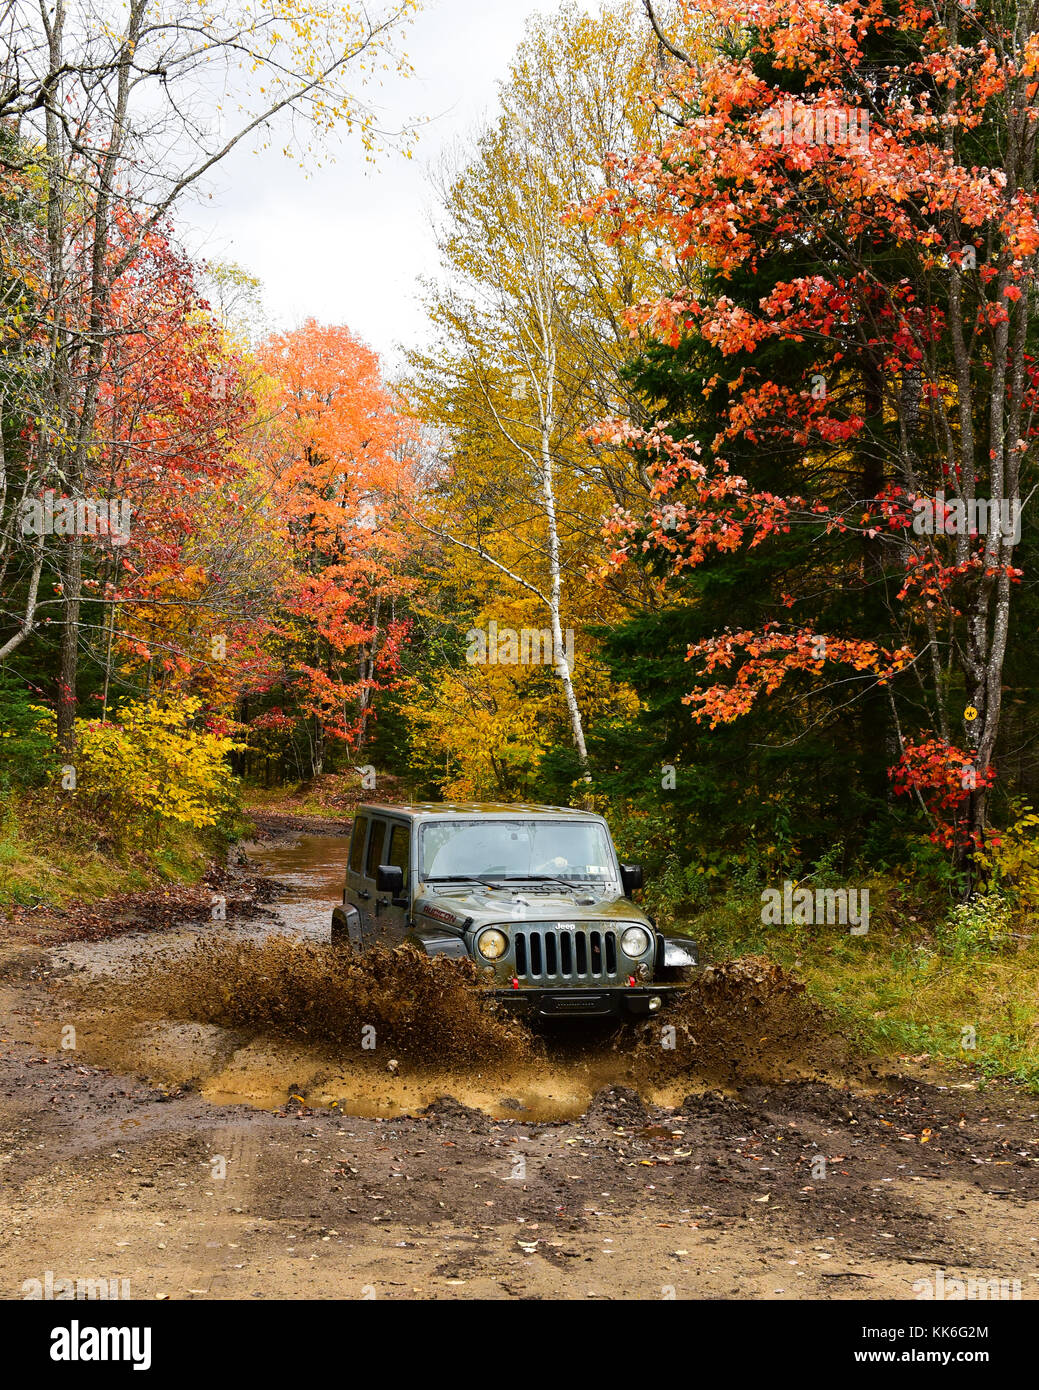 Jeep Rubicon Wrangler splashing through a water and mud puddle in the Adirondack NY forest. Stock Photo